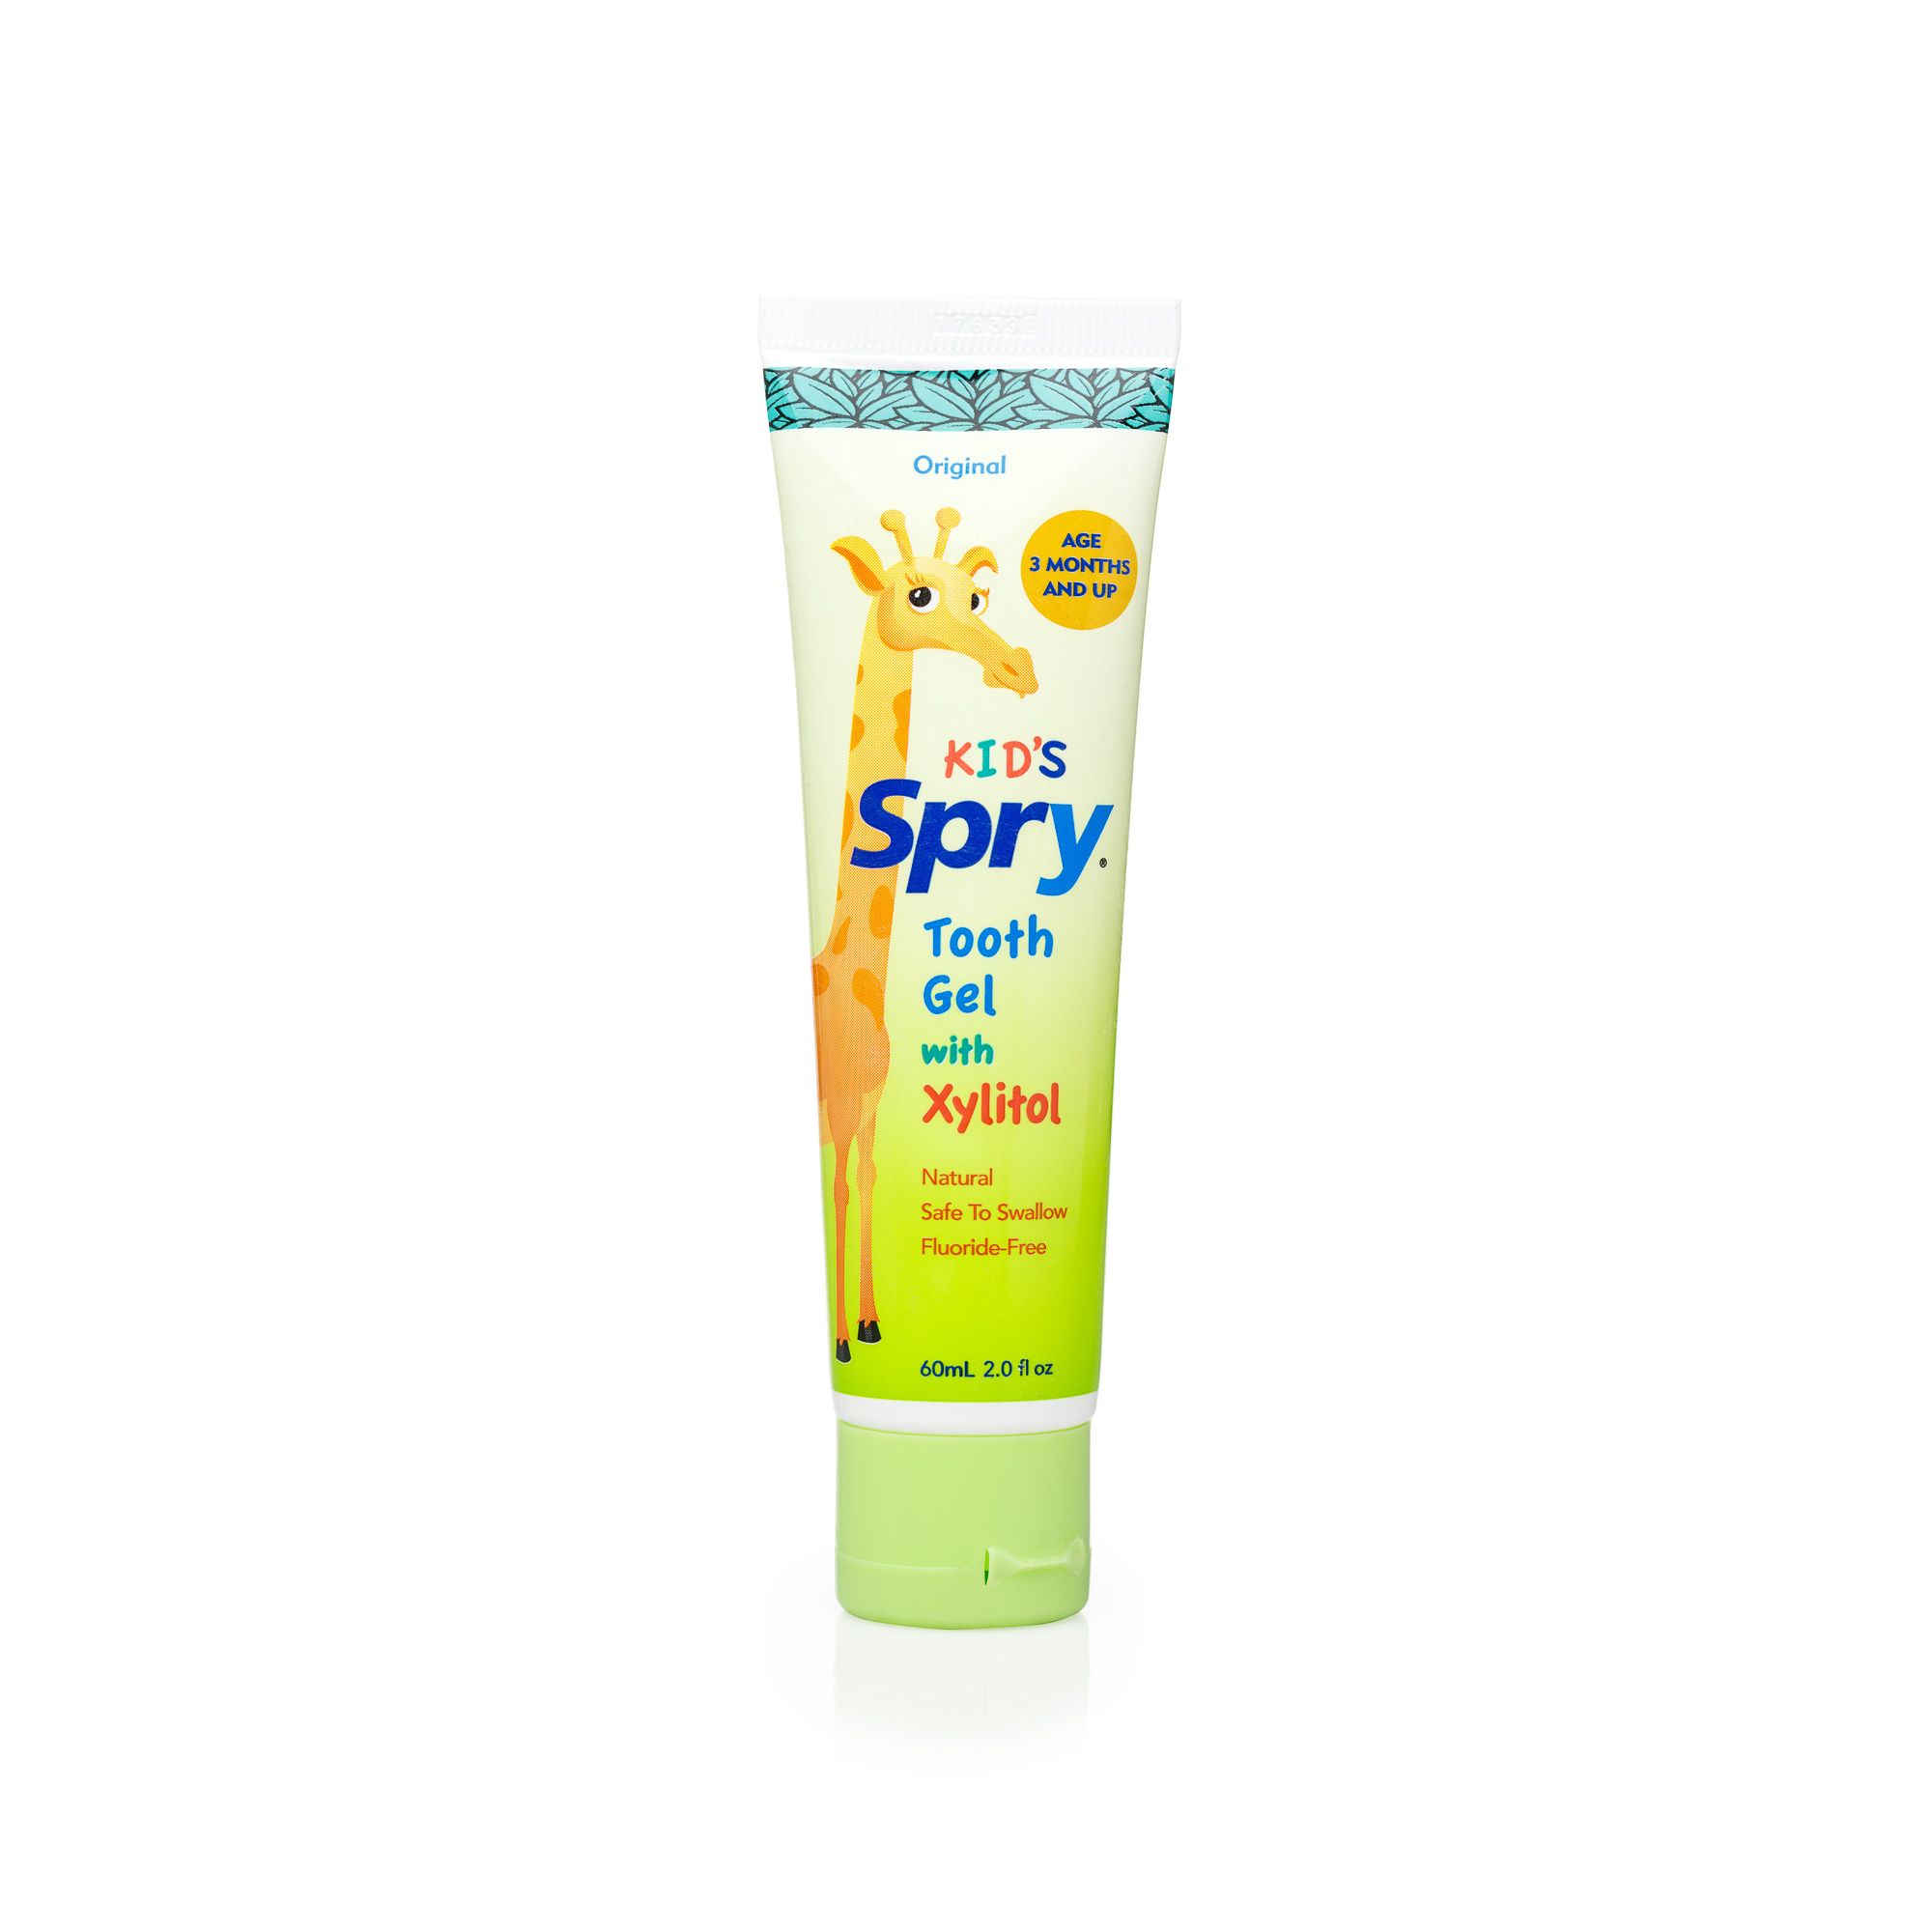 Spry Kid's Fluoride-Free Tooth Gel with Xylitol - Original Flavour	60ml | Little Baby.